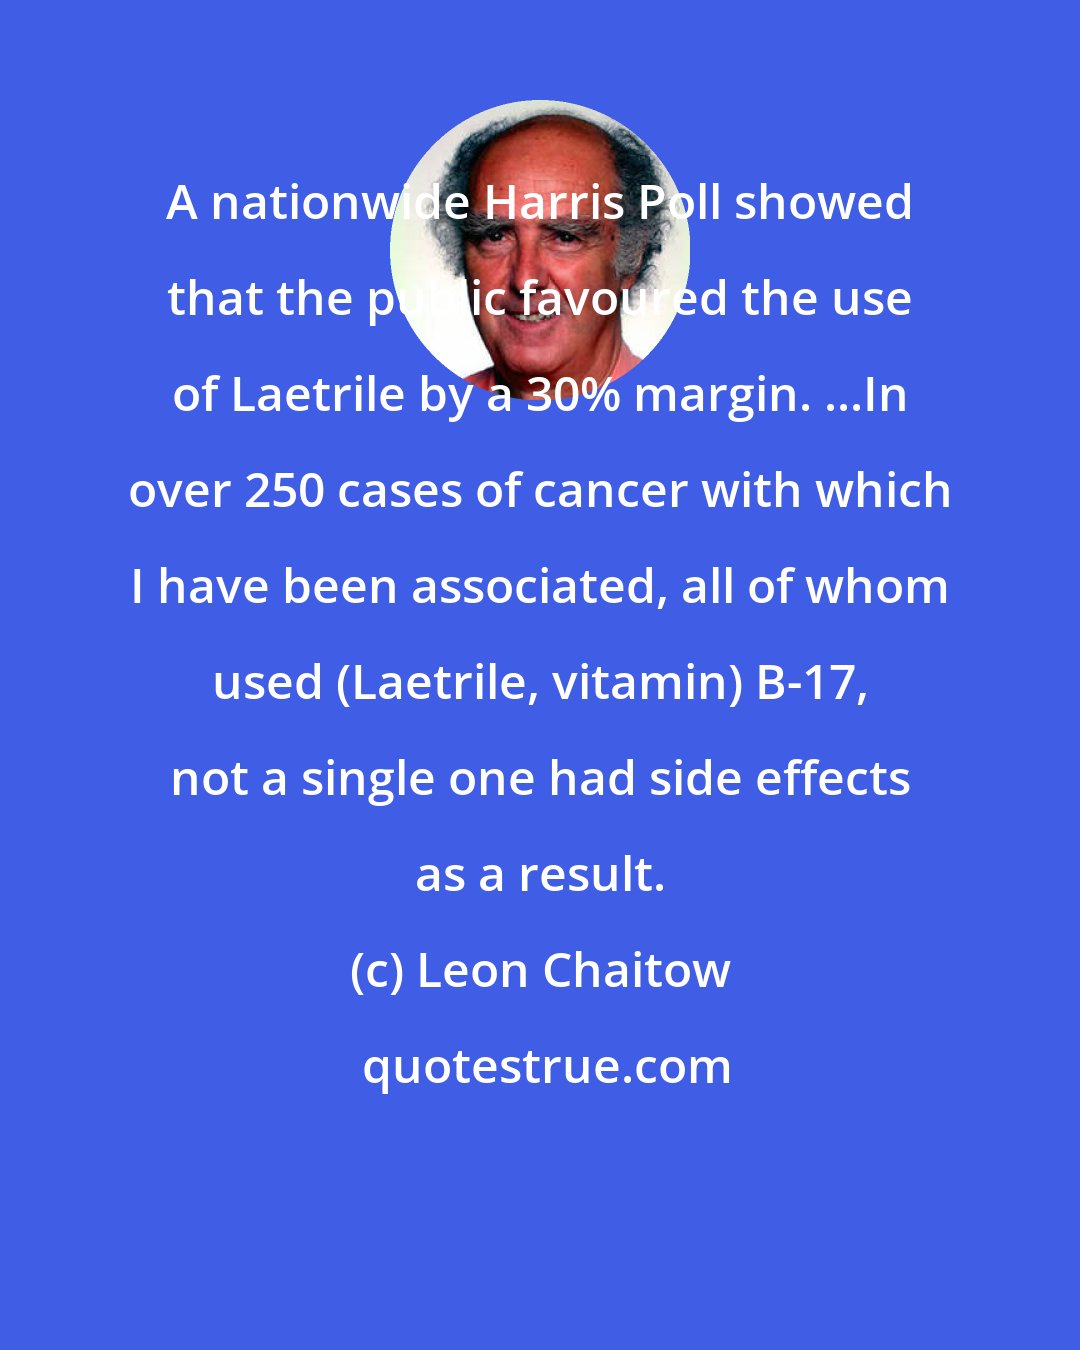 Leon Chaitow: A nationwide Harris Poll showed that the public favoured the use of Laetrile by a 30% margin. ...In over 250 cases of cancer with which I have been associated, all of whom used (Laetrile, vitamin) B-17, not a single one had side effects as a result.